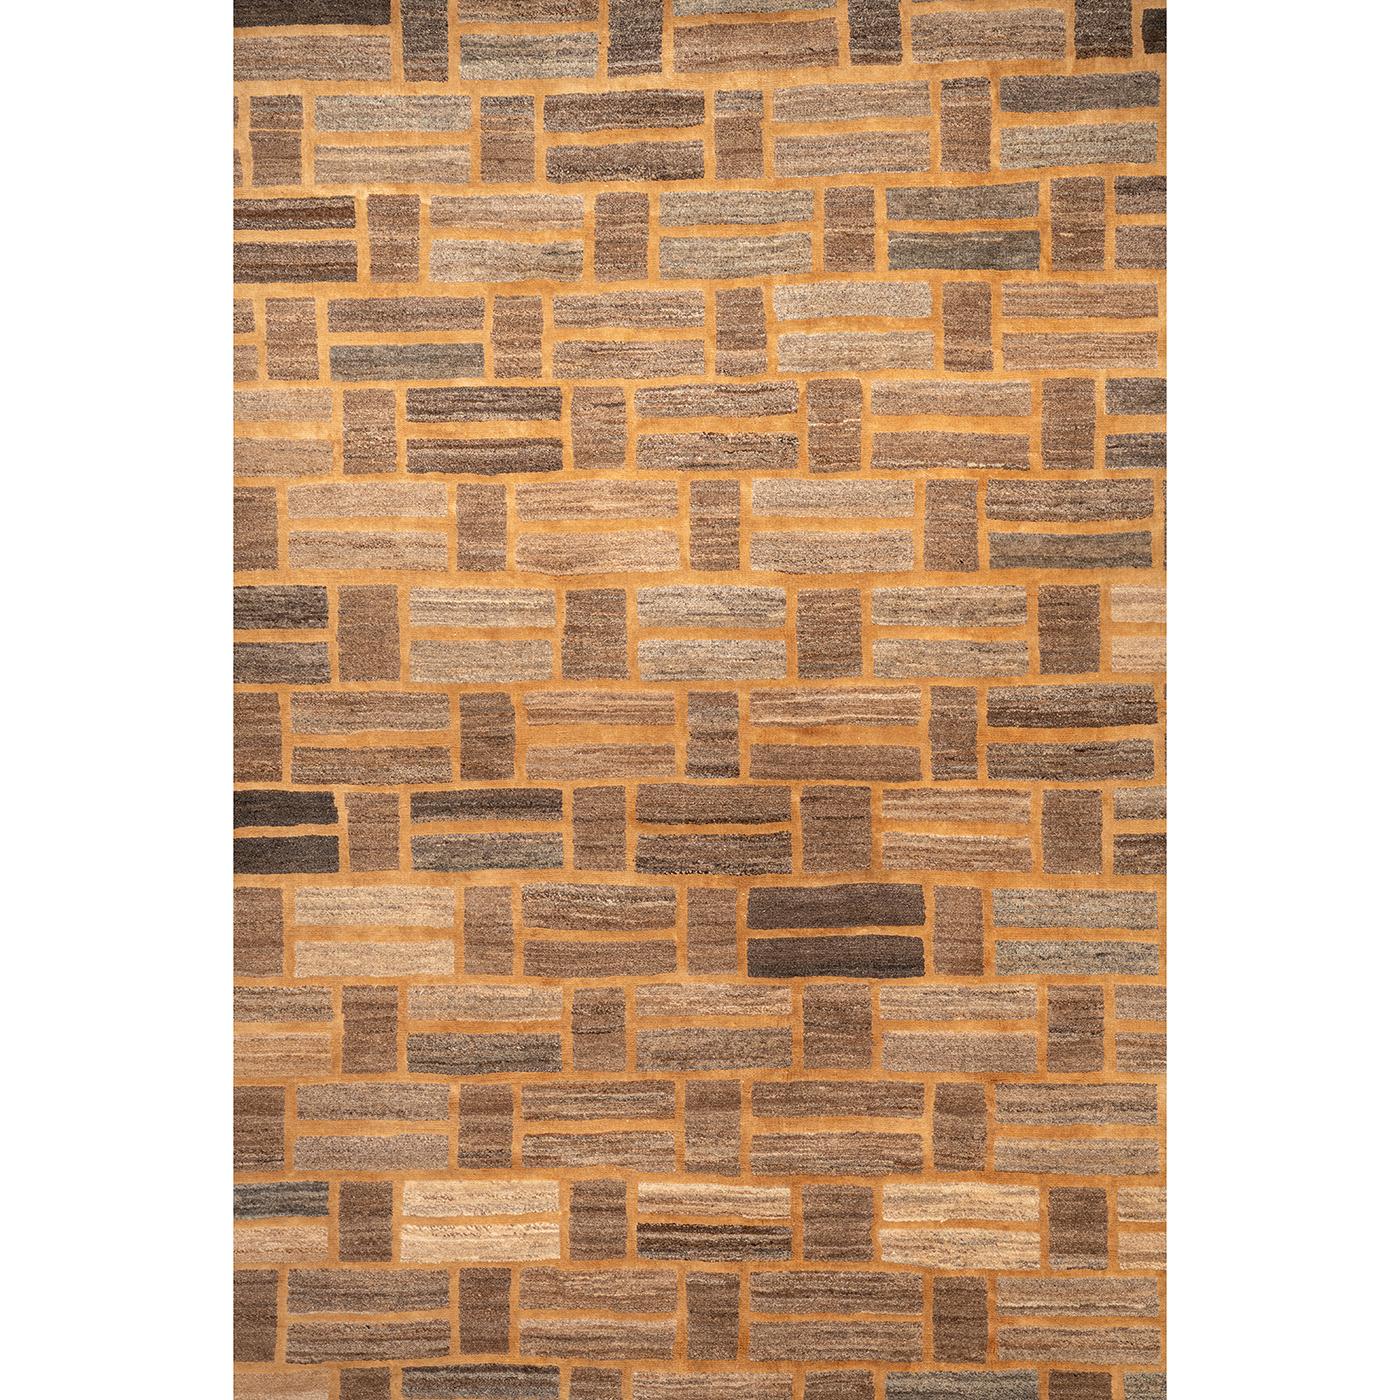 Named after the geometric pattern recalling a brick wall, this eye-catching rug is handwoven in Iran using a traditional Iranian knotting technique. Woven from the finest wool and hemp, the chromatic warmth and depth of the amber and chestnut tones